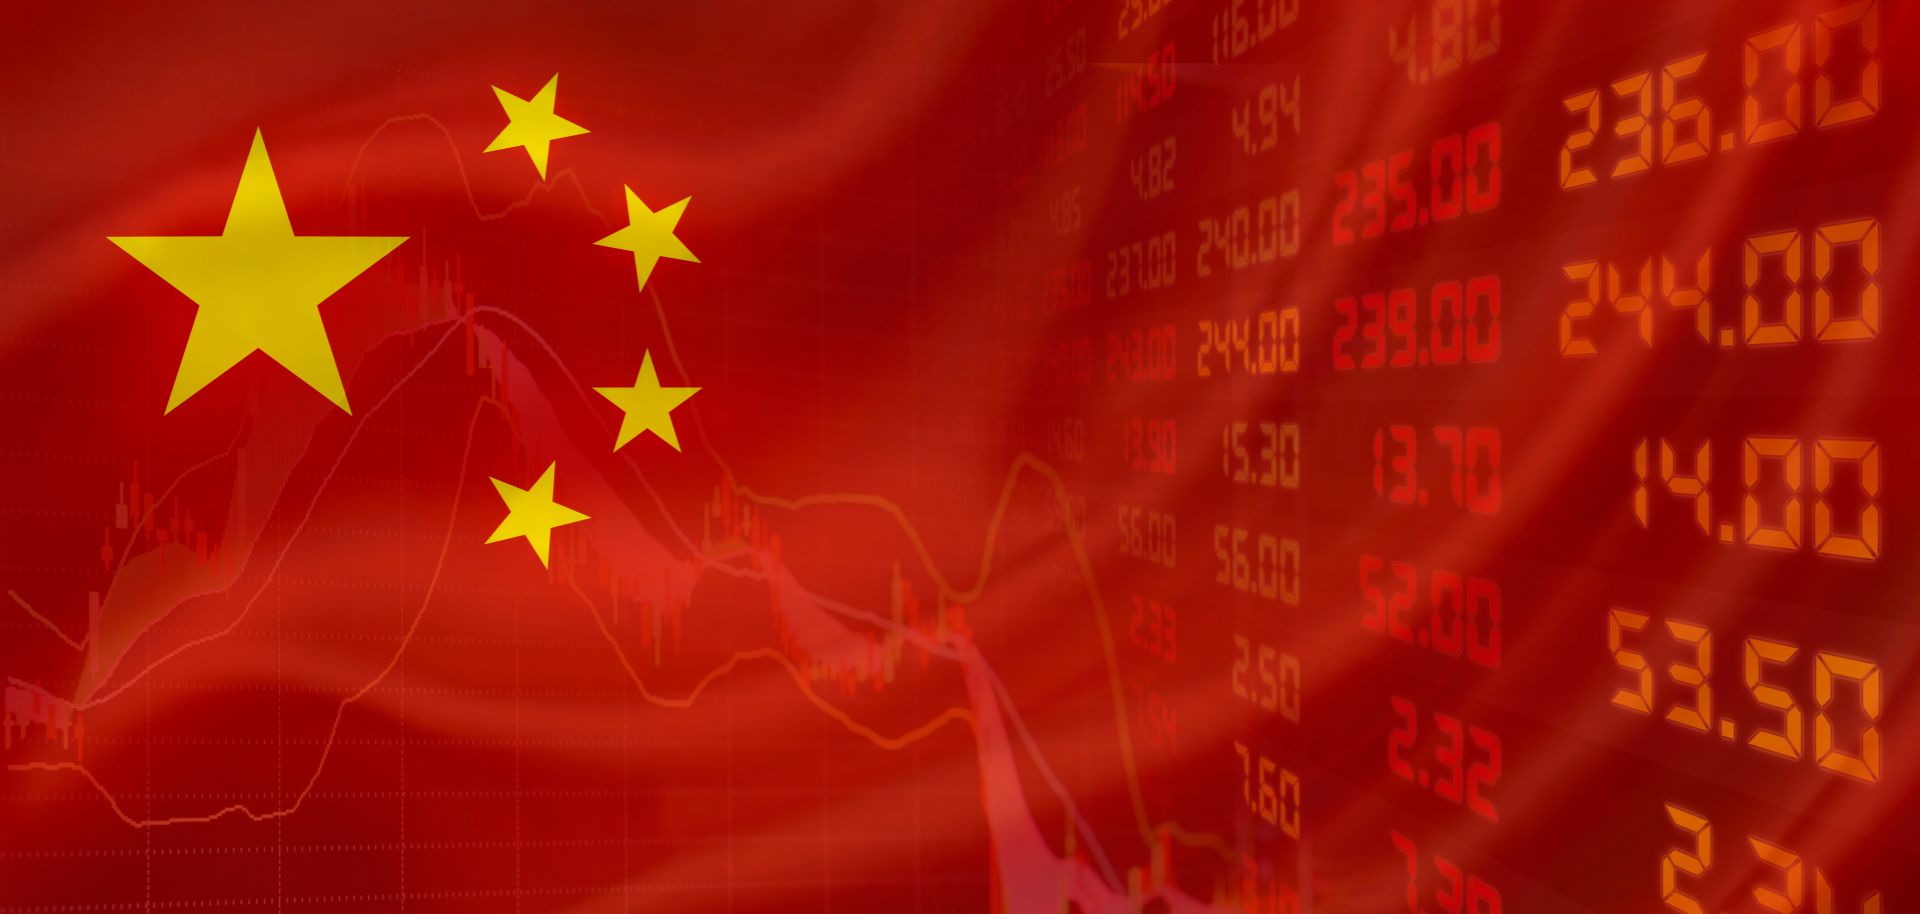 An illustration shows the Chinese flag overlaying stock prices.